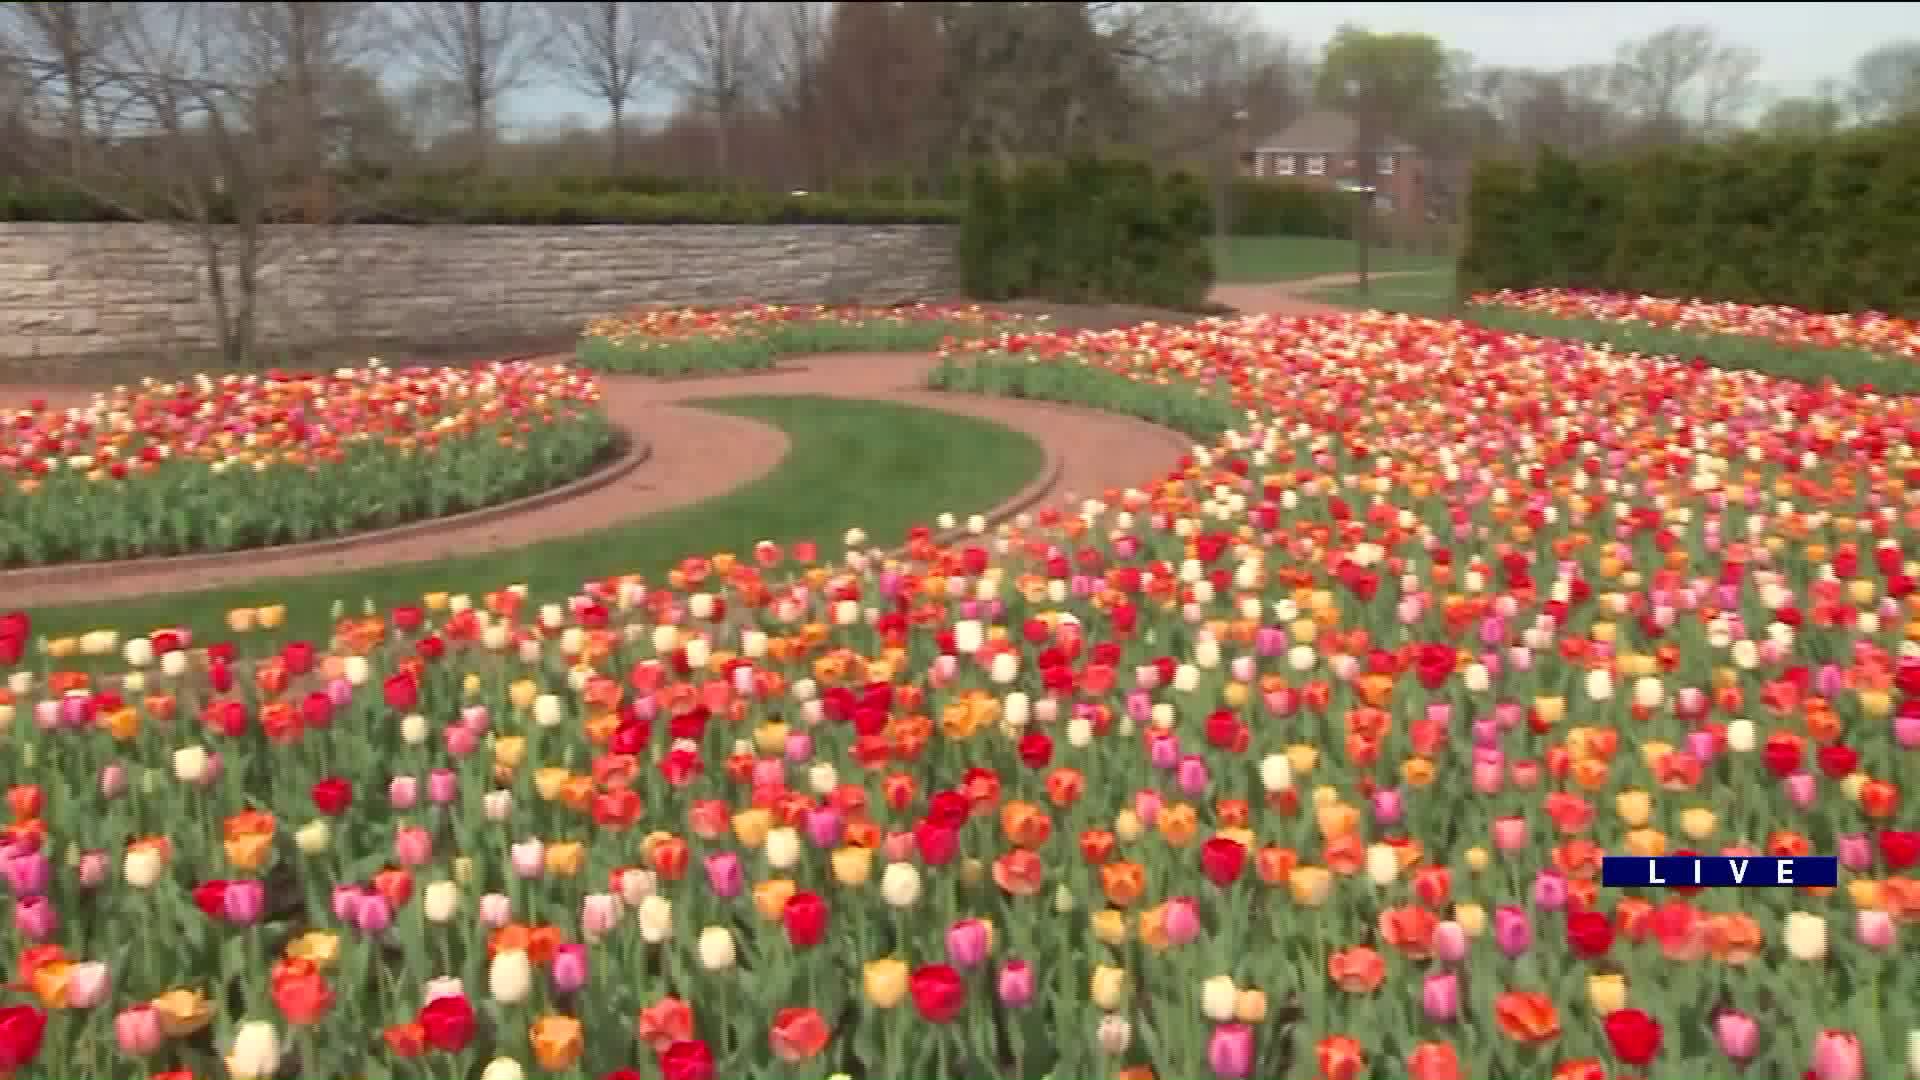 Around Town checks out the McCormick Museum at Cantigny Park